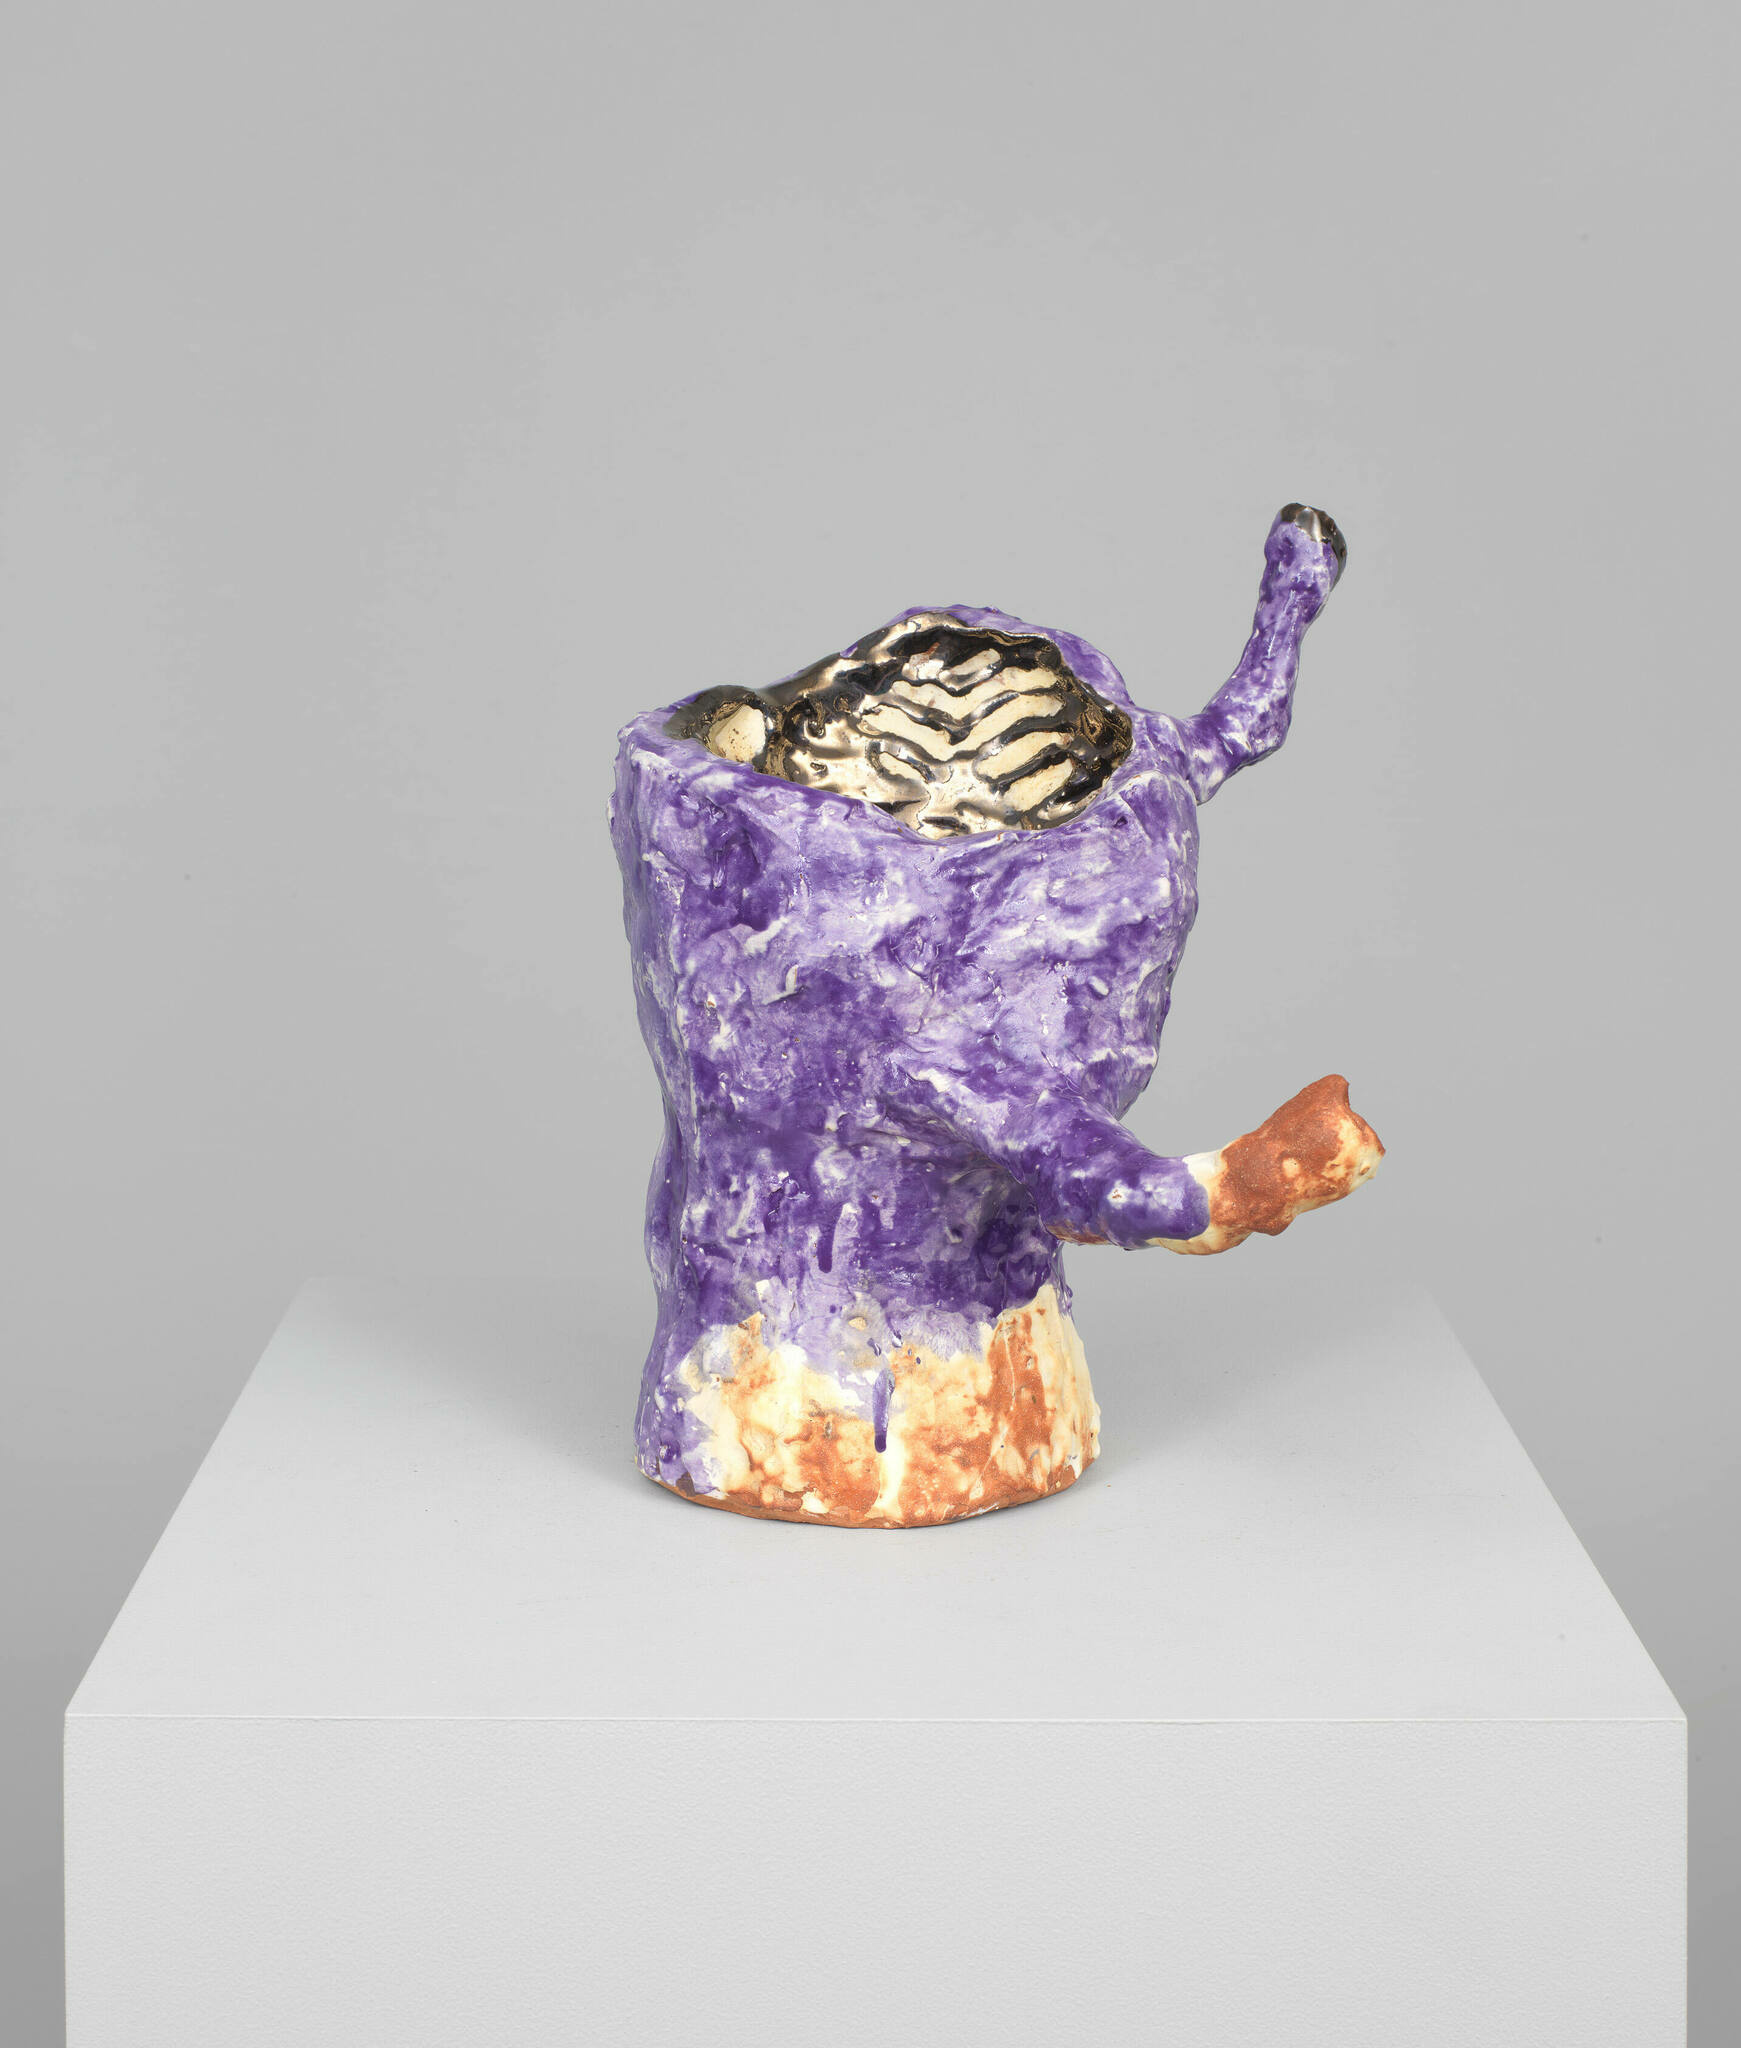 Corporeal red clay sculpture in a roughly finished purple glaze and metallic gold interior with two skinny protruding armatures